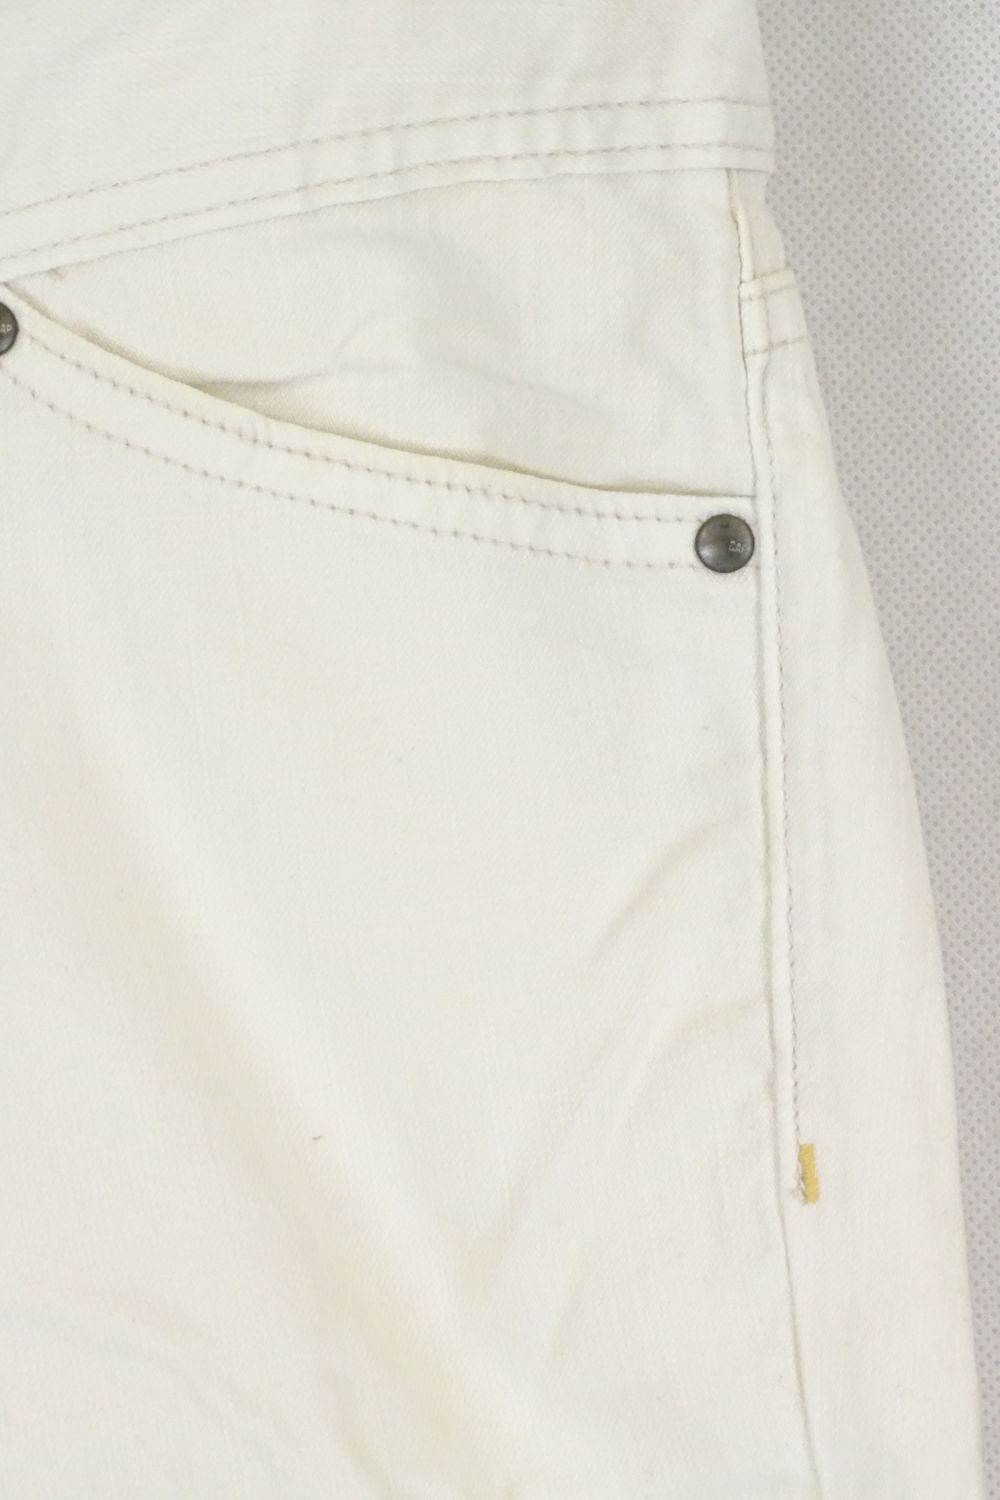 Gap Low Rise Cropped Shorts White  S